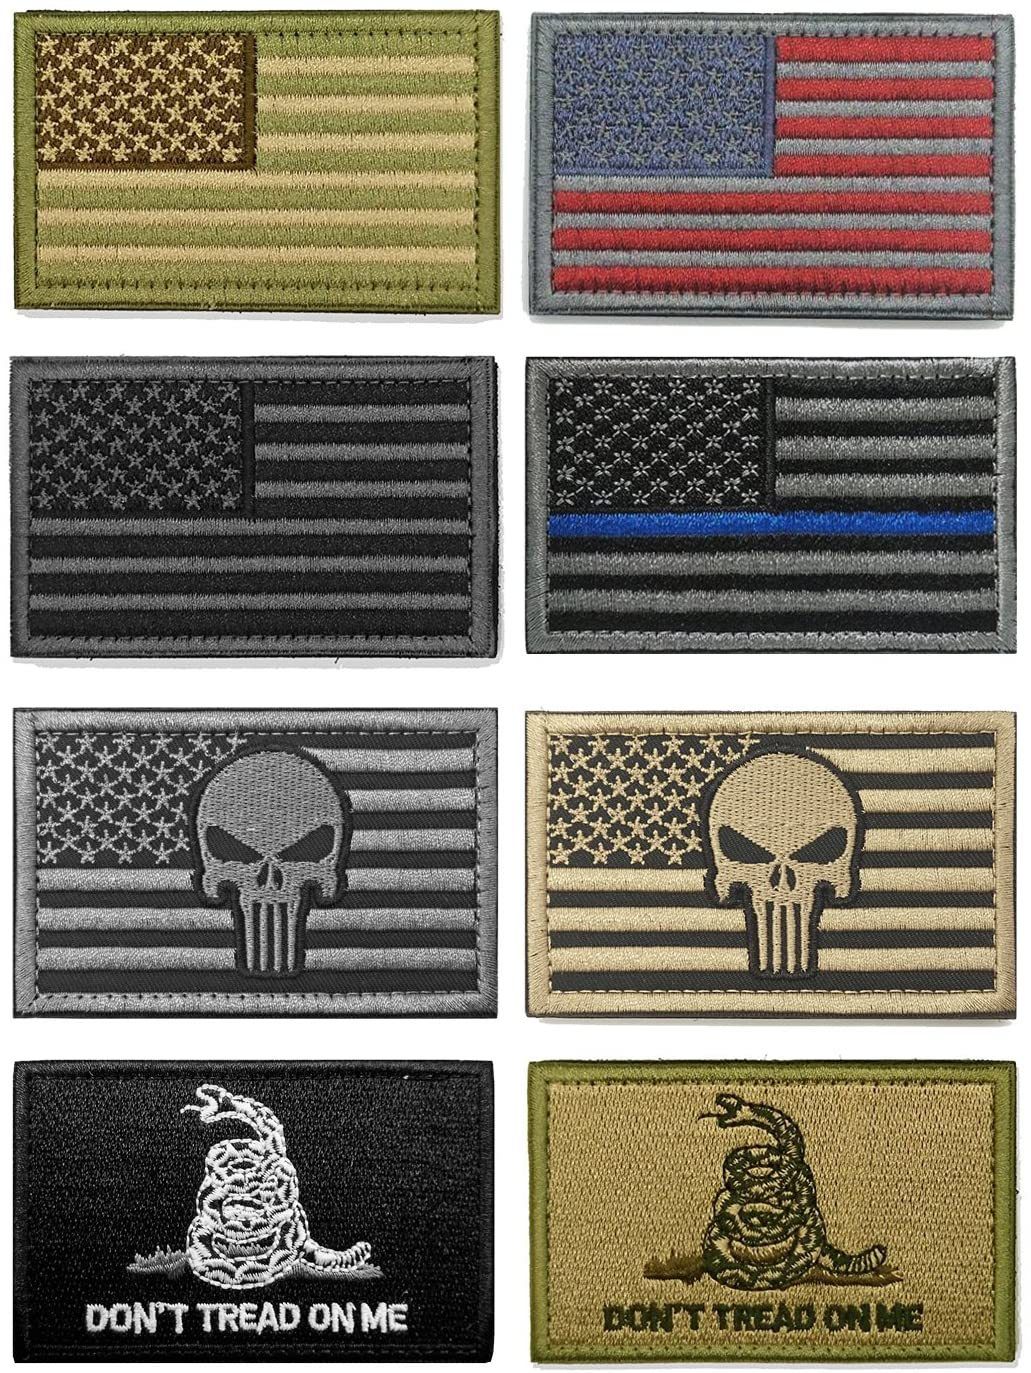 8 Pack] 2x3" American Flag & Patriotic Velcro Embroidered Patches : Freedom Band : Armband Guard Cover Protective Accessories – Freedom Bands For Diabetics